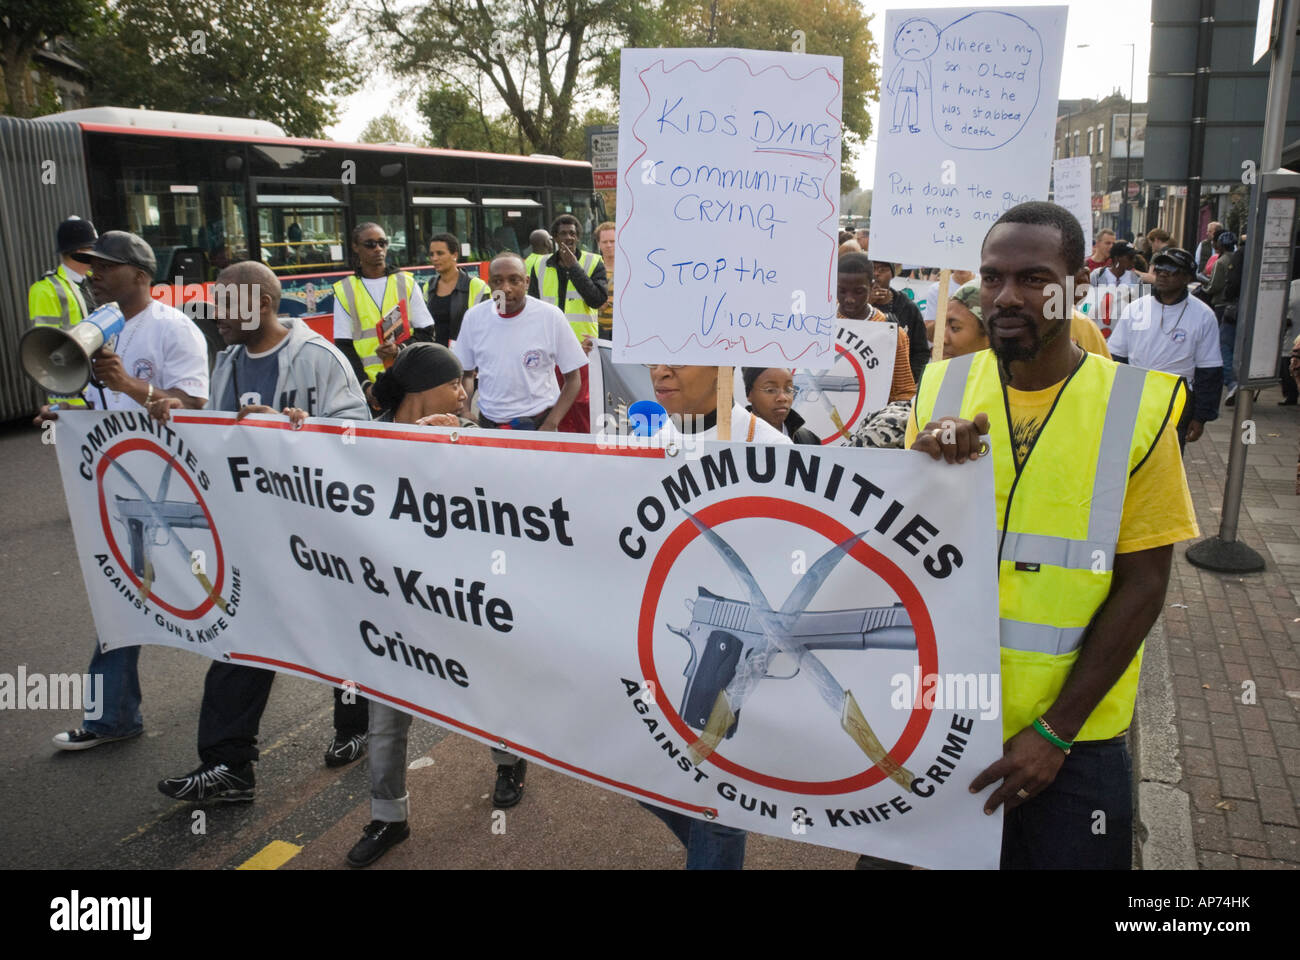 This Community March Against Gun And Knife Crime In Hackney London Started In An Area Notorious For Several Murders Stock Photo Alamy